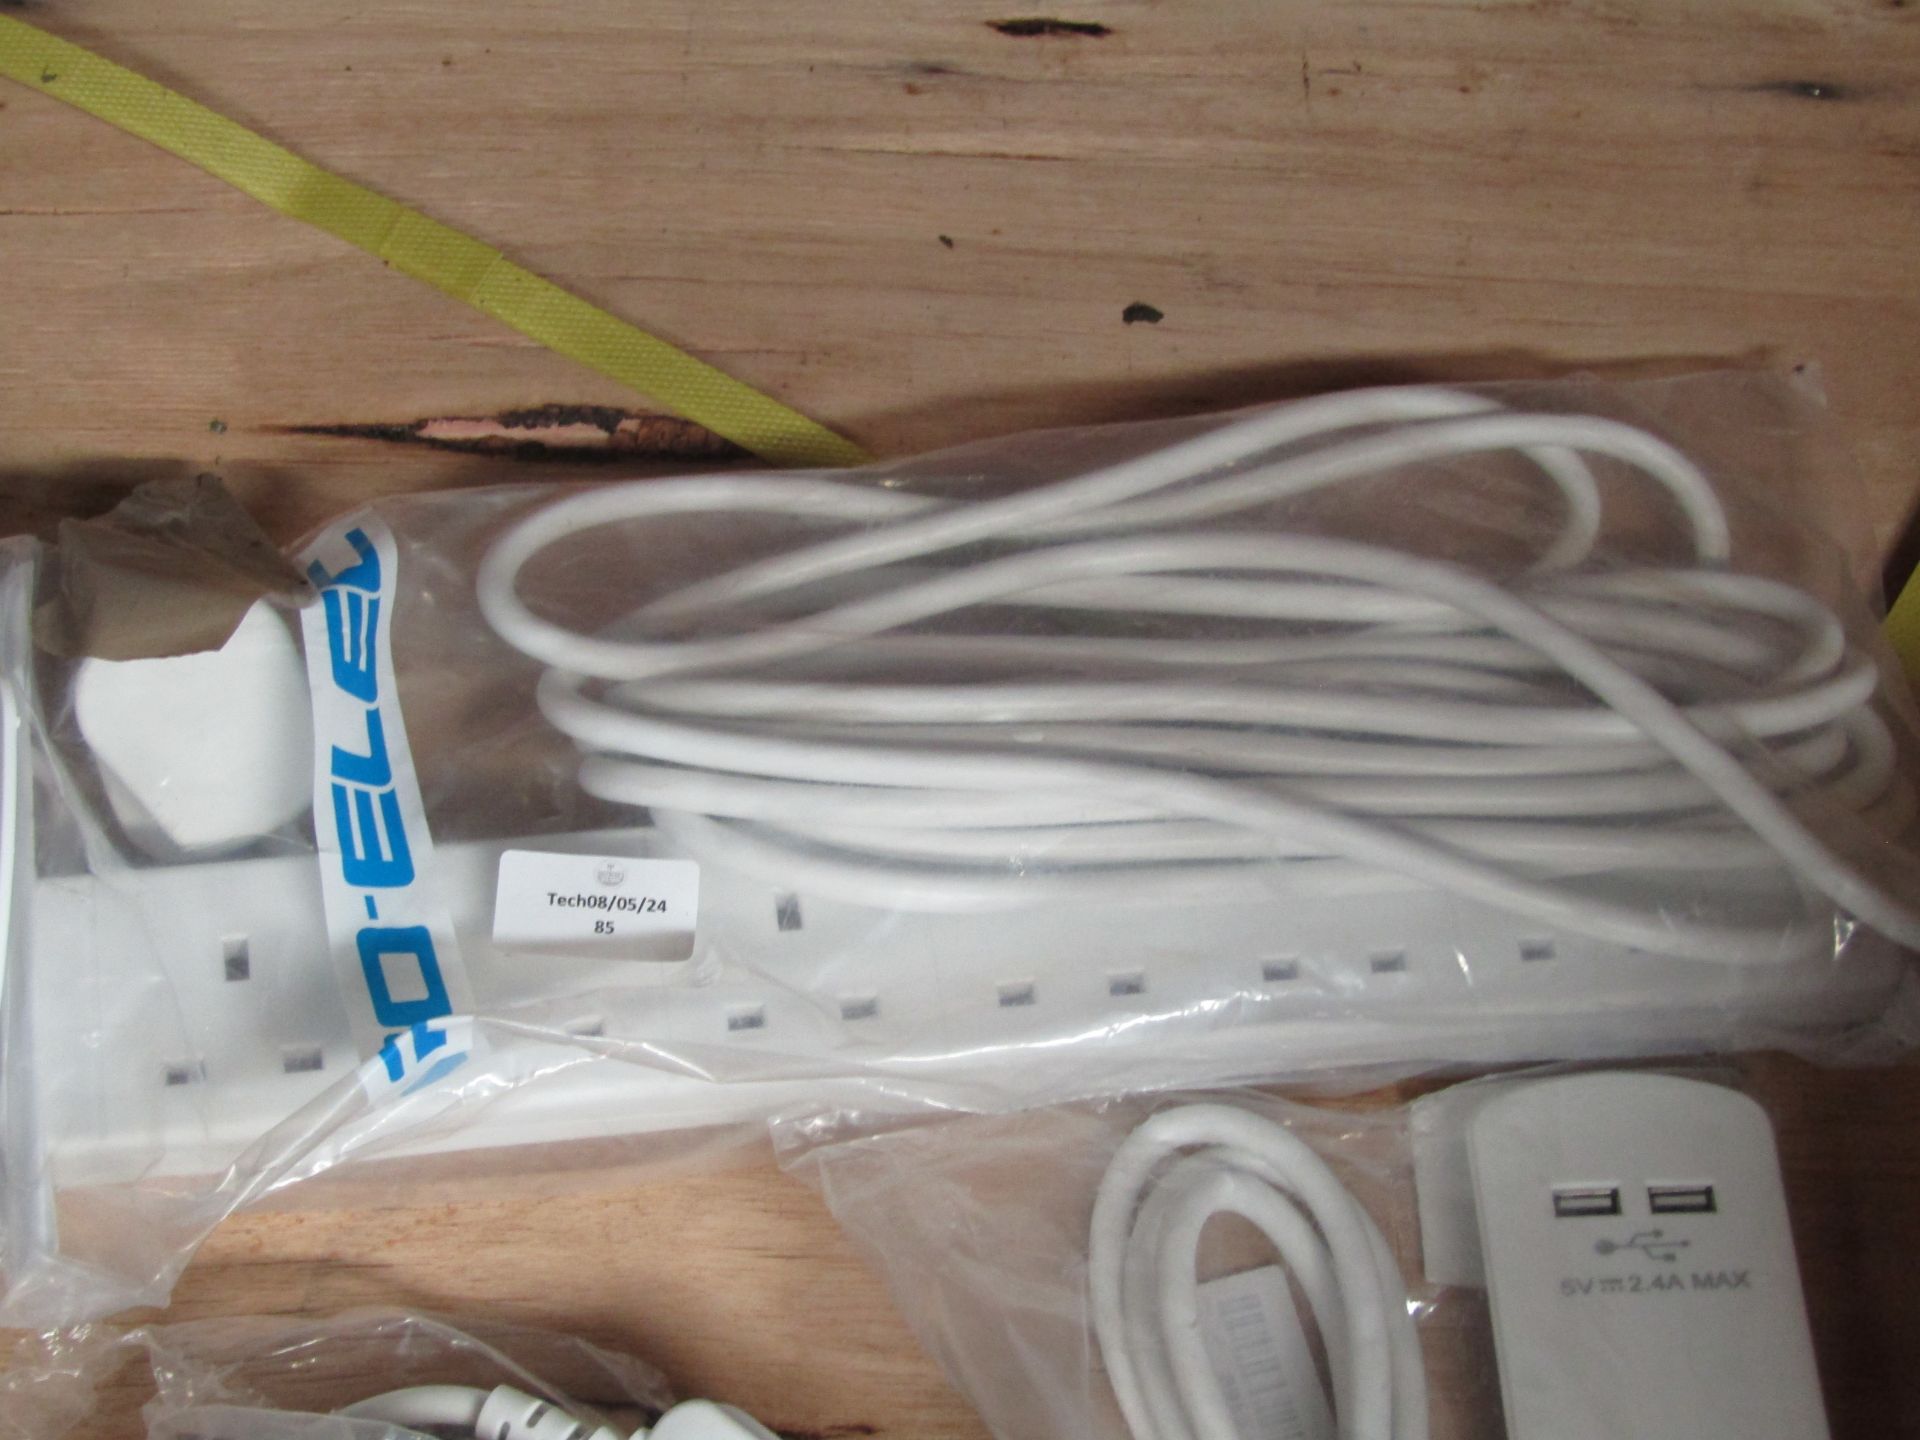 PRO-ELEC 2m 6-Gang Extention Lead - Unchecked & Packaged.